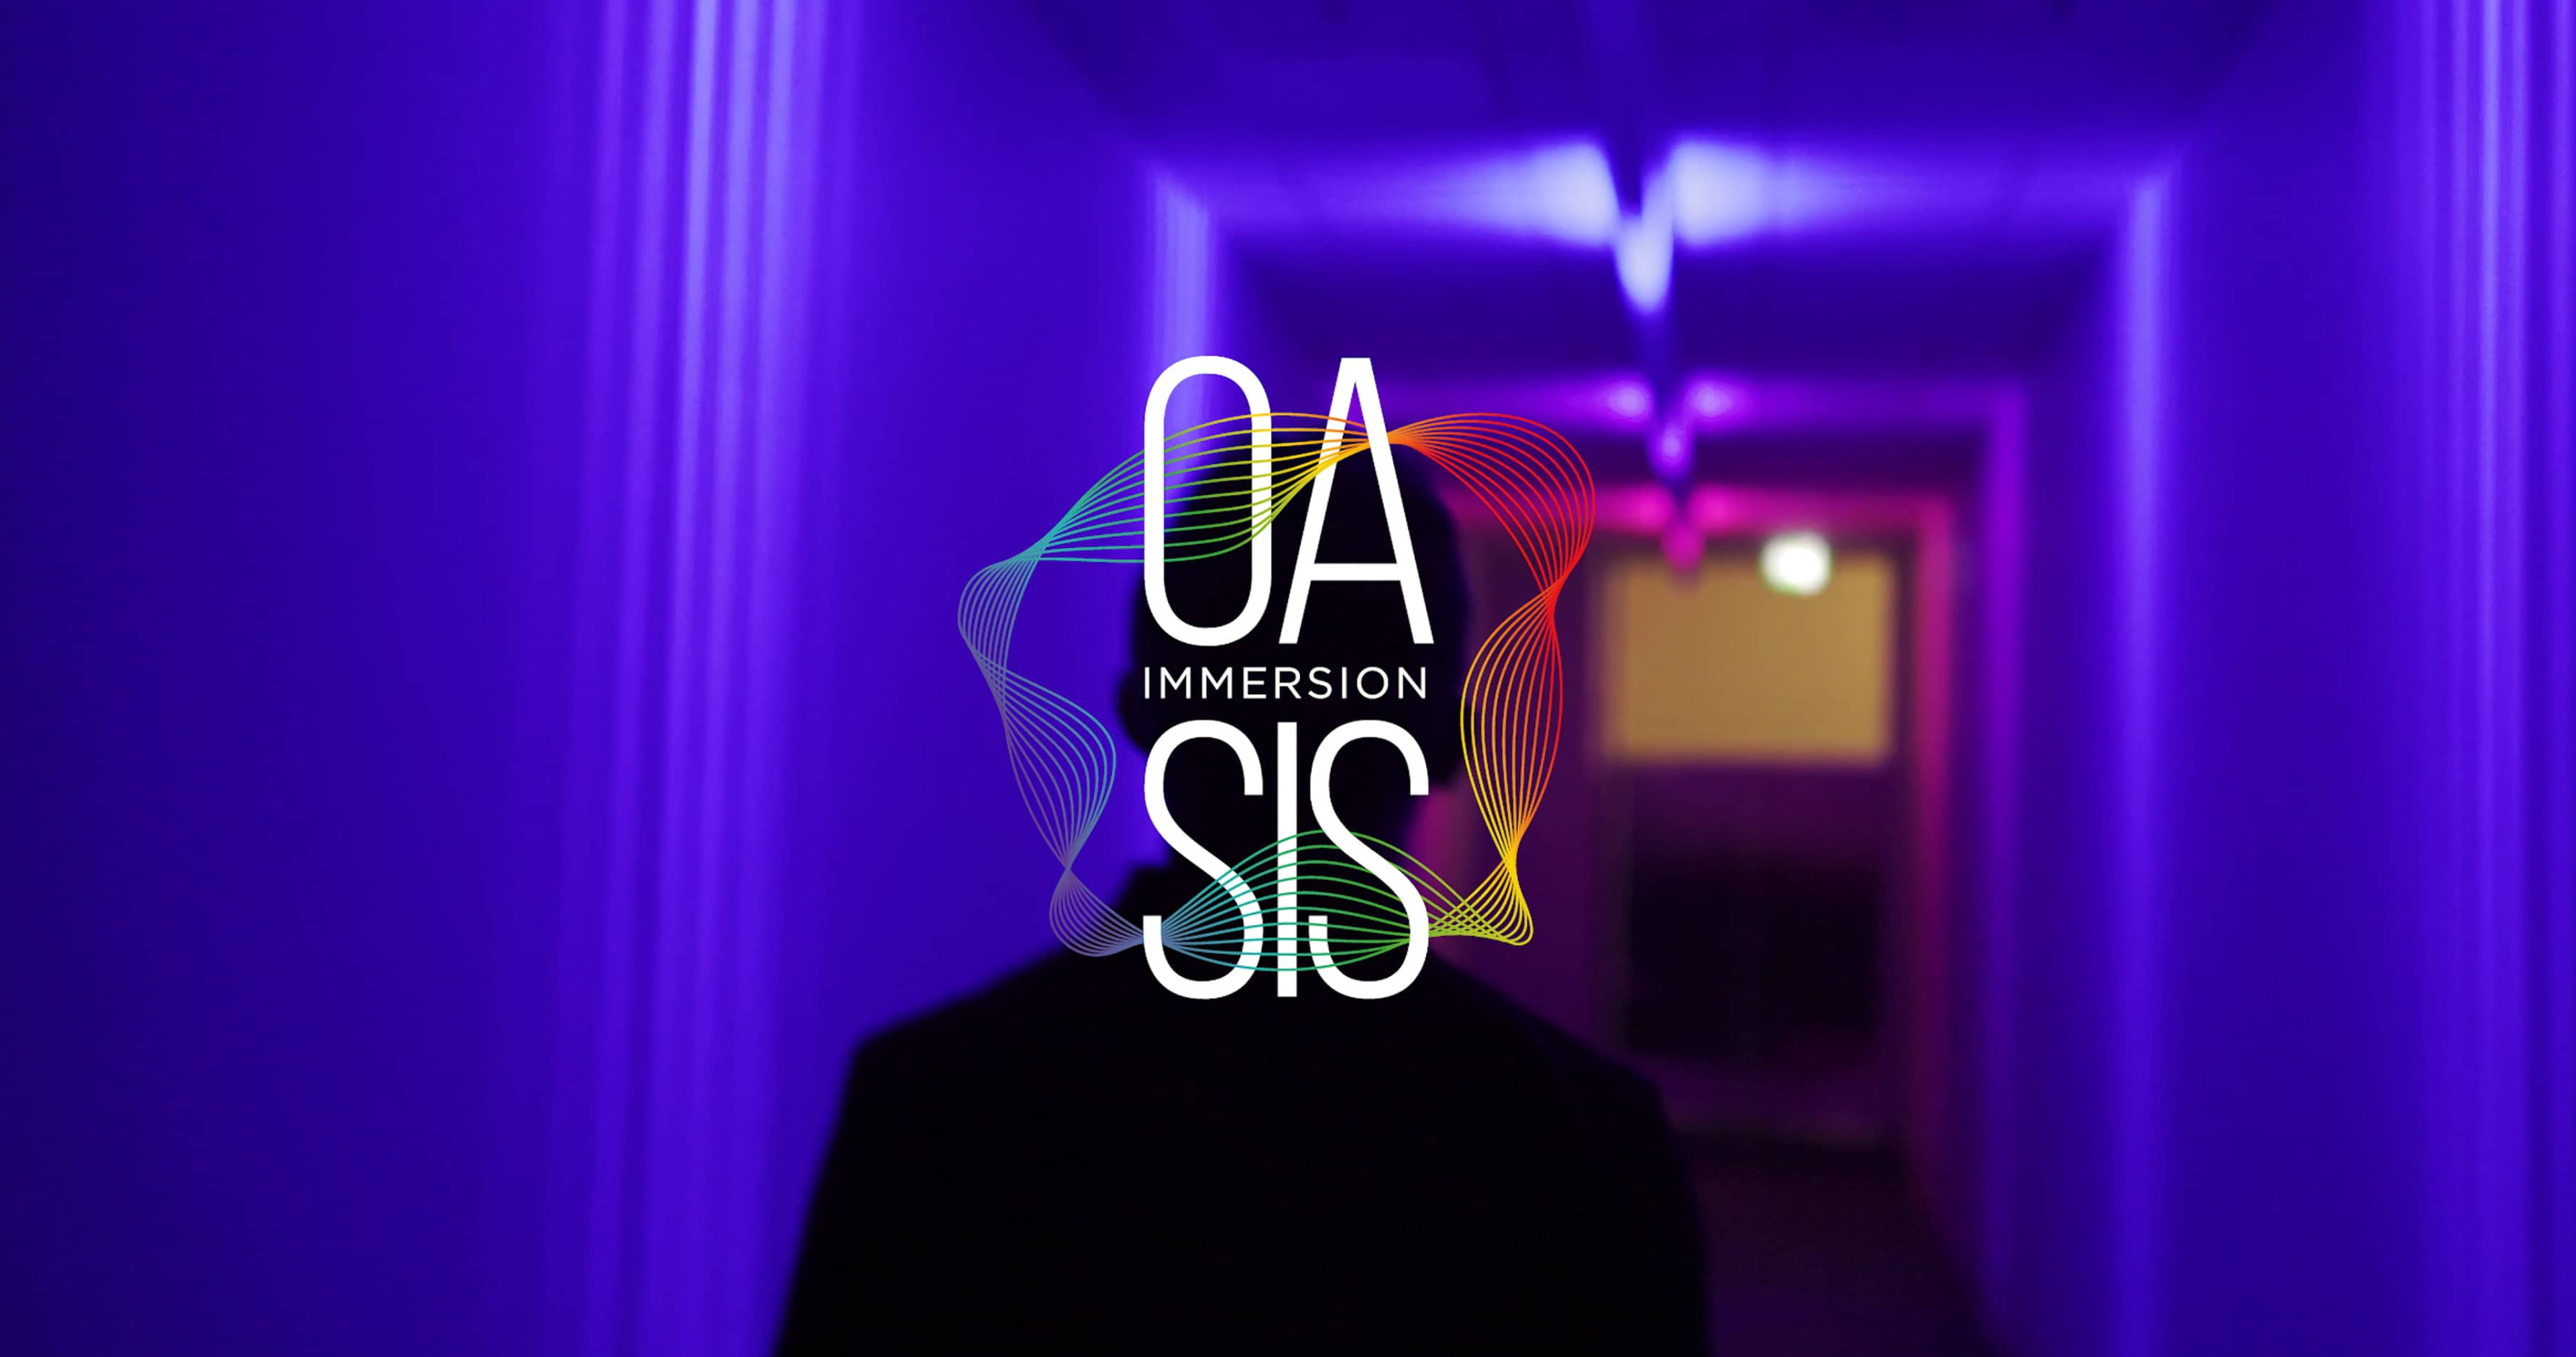 OASIS immersion - Canada's largest indoor immersive experience